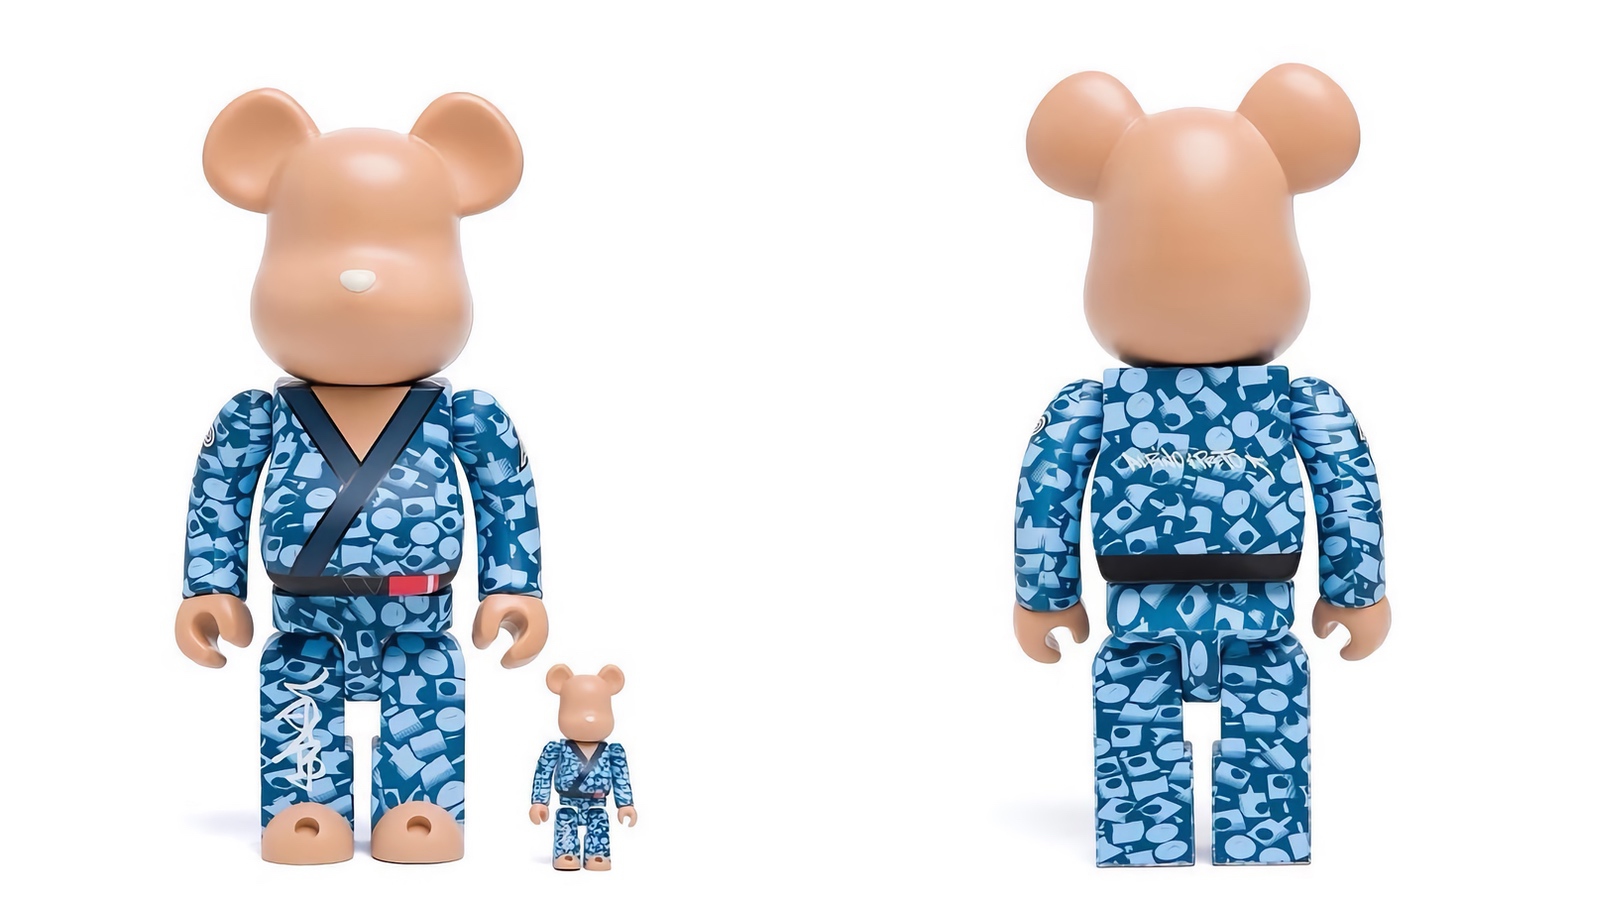 You are currently viewing Stash x Albino & Preto Be@rbrick 100%/400% Set by Medicom Toy